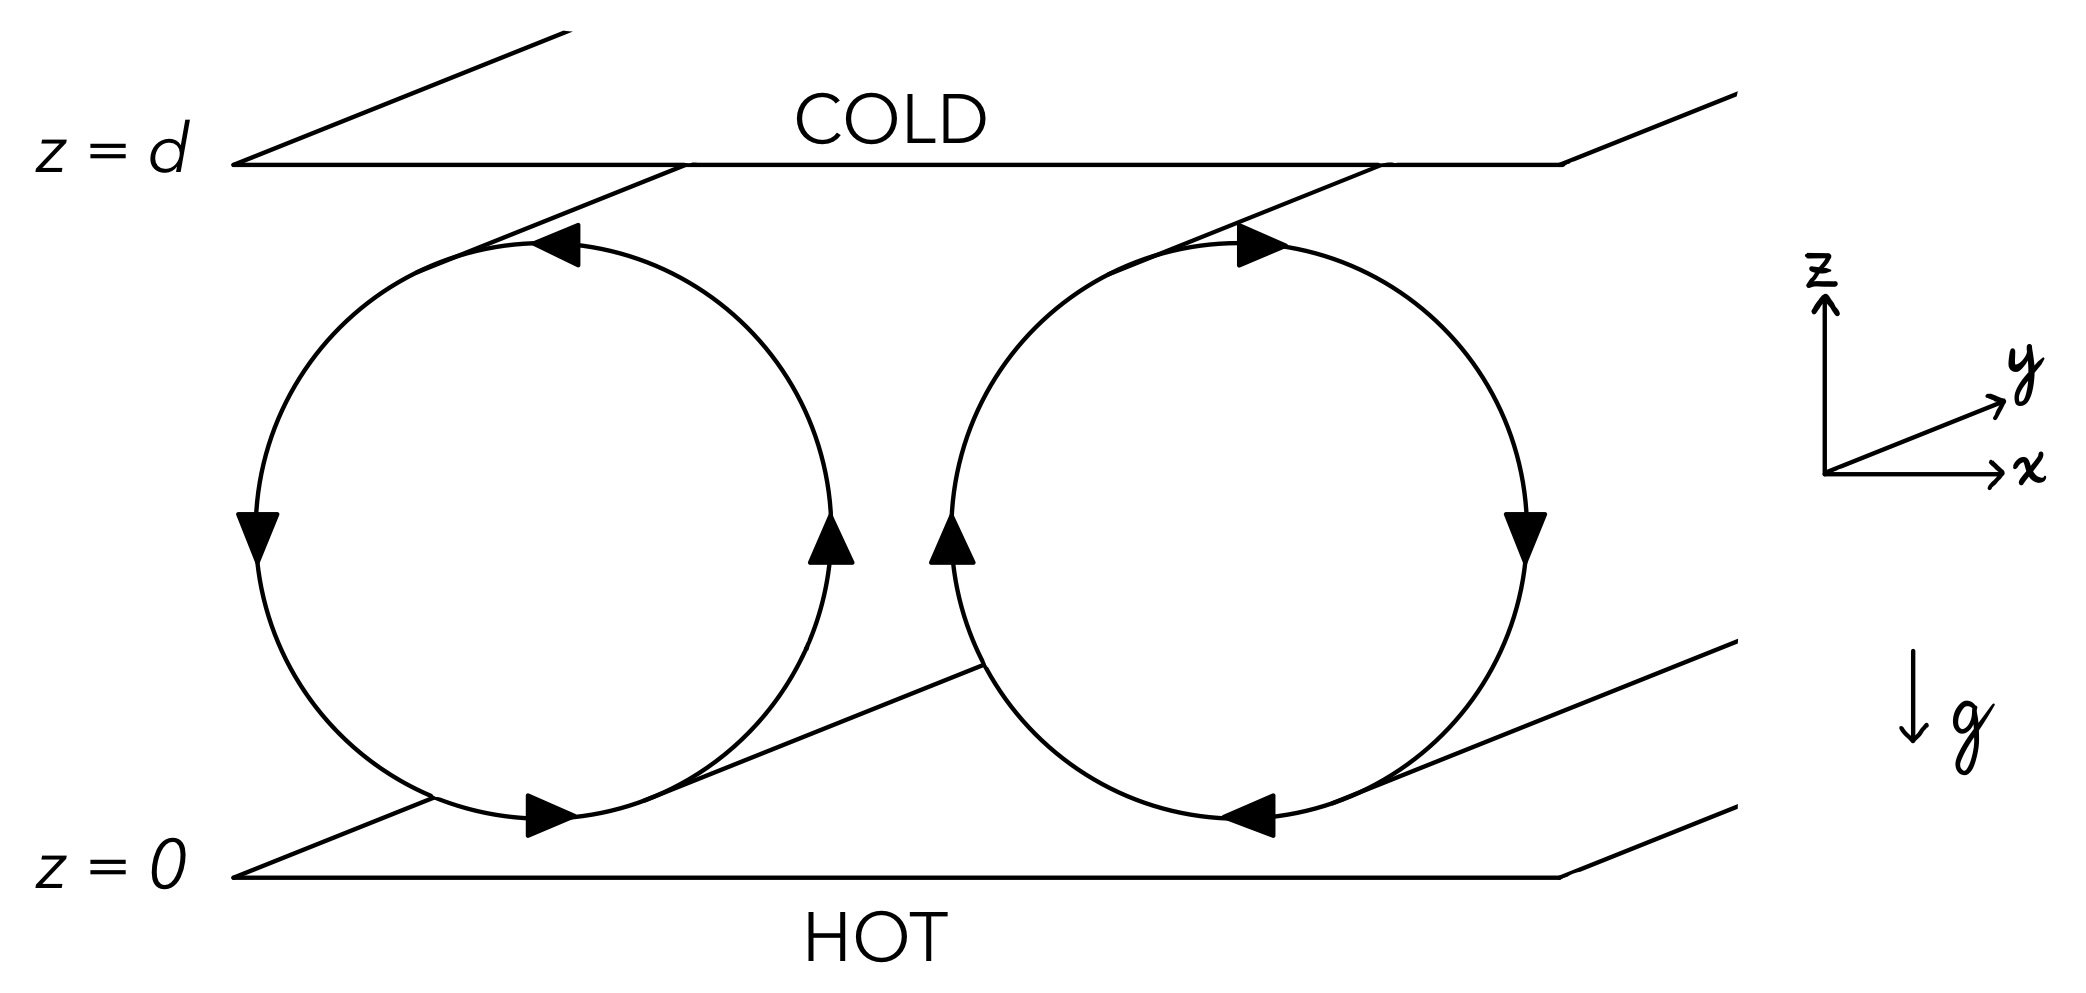 Figure 1. Thermal convective rolls between two infinite plates of different temperatures. Reproduced following Acheson (1990). (18)